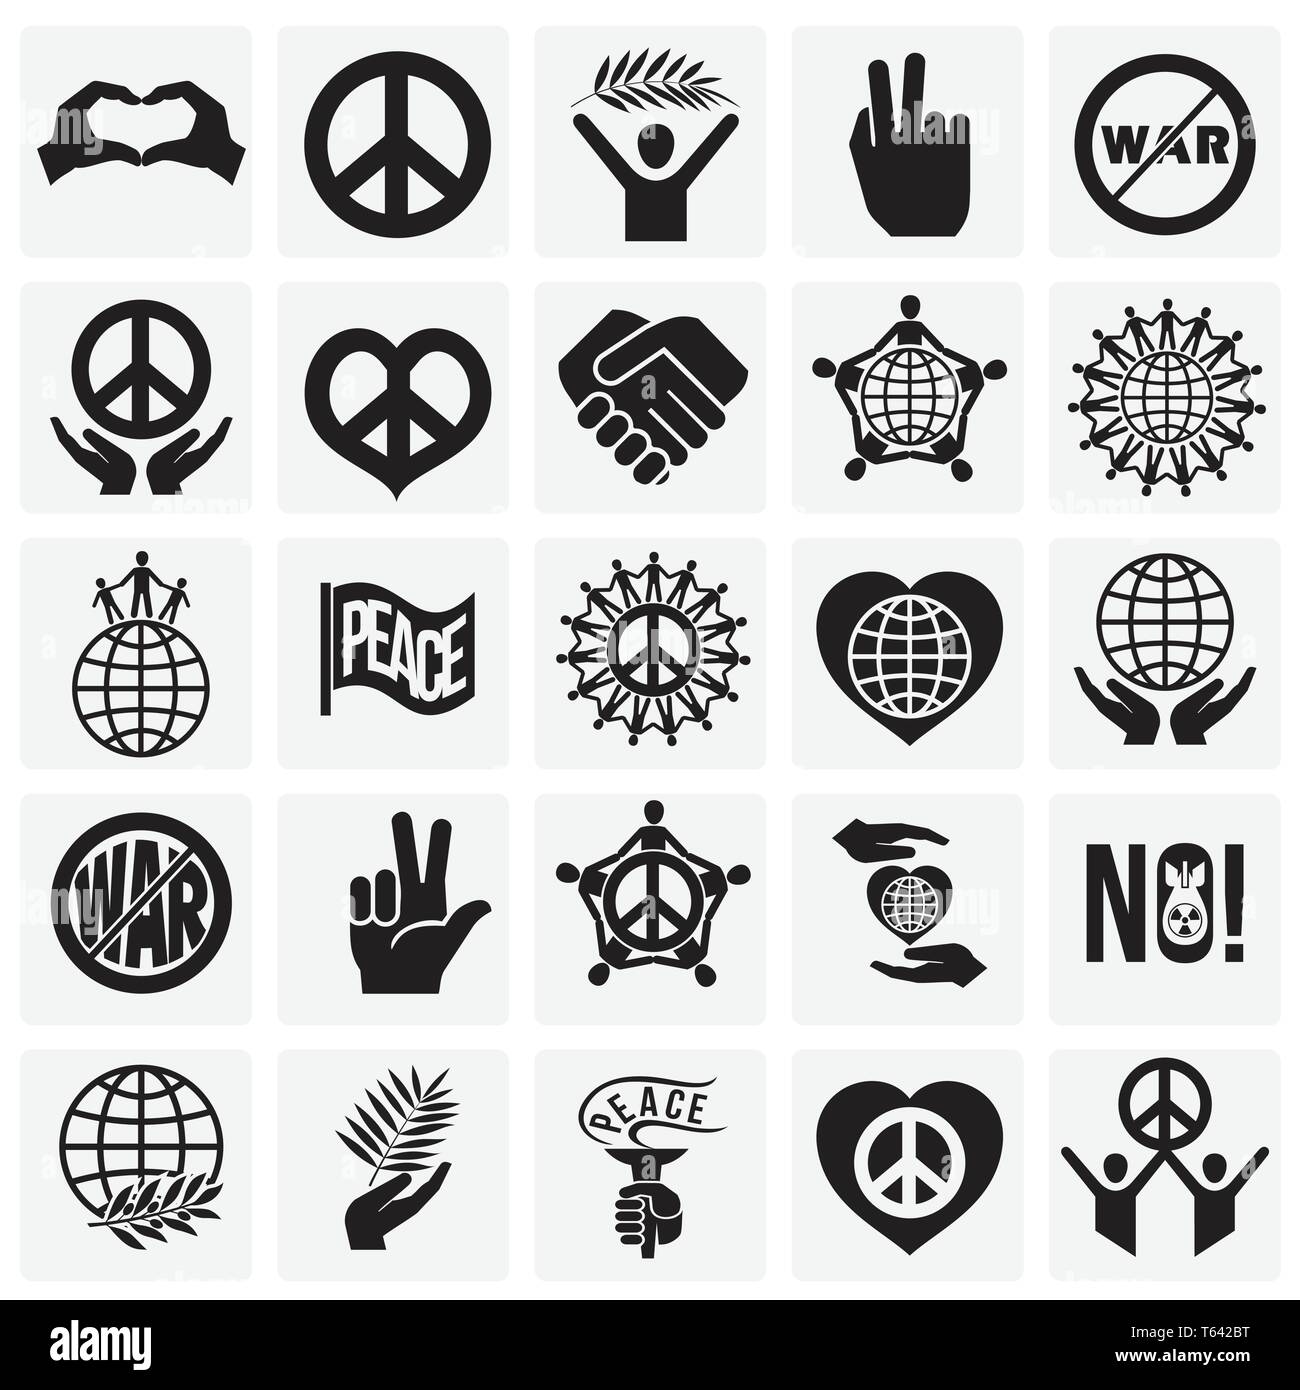 Peace icons set on squares background for graphic and web design. Simple vector sign. Internet concept symbol for website button or mobile app. Stock Vector